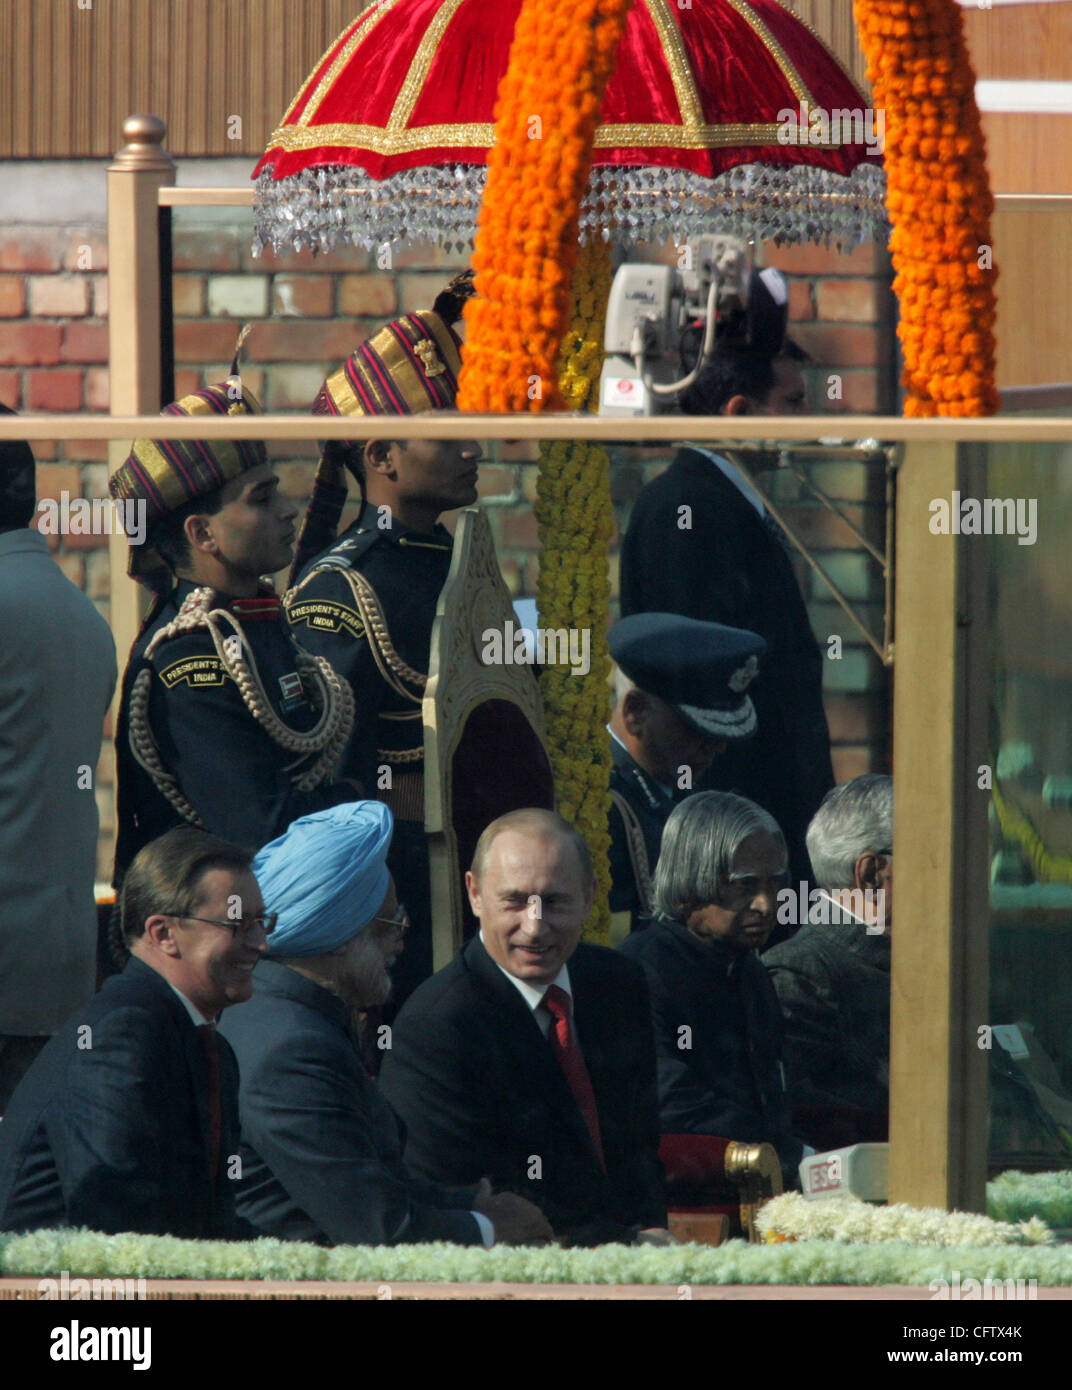 (l-r)Russian Defence Minister Sergei Ivanov,Prime Minister of India Dr. Manmohan Singh,President of Russia Vladimir Putin,President of India Abdul Kalam attending military parade in Deli on the Independance Day of India. Stock Photo